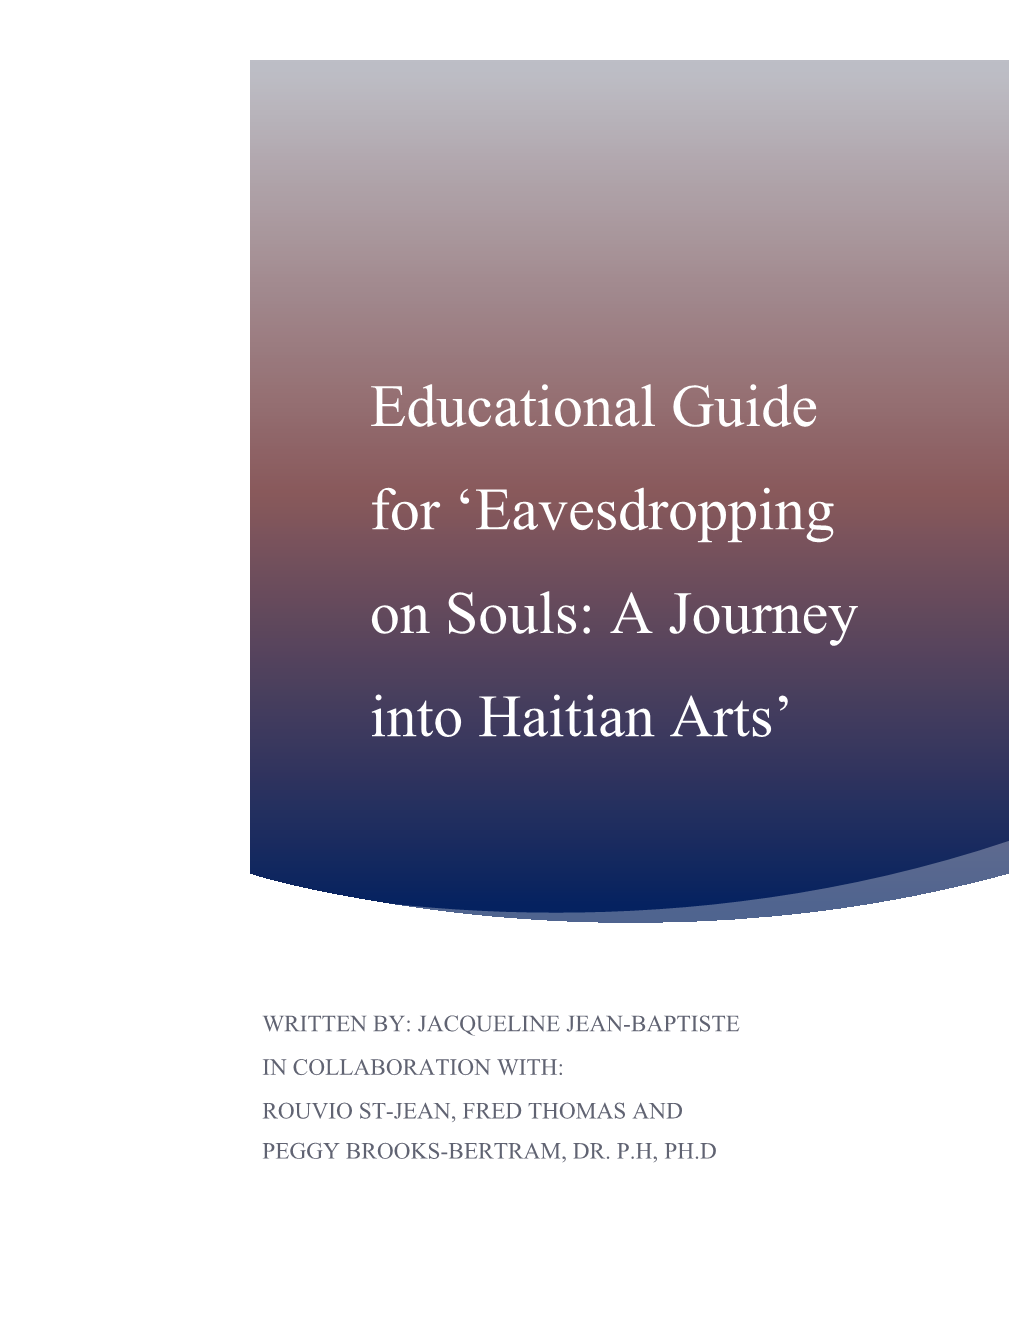 Educational Guide for 'Eavesdropping on Souls: a Journey Into Haitian Arts'